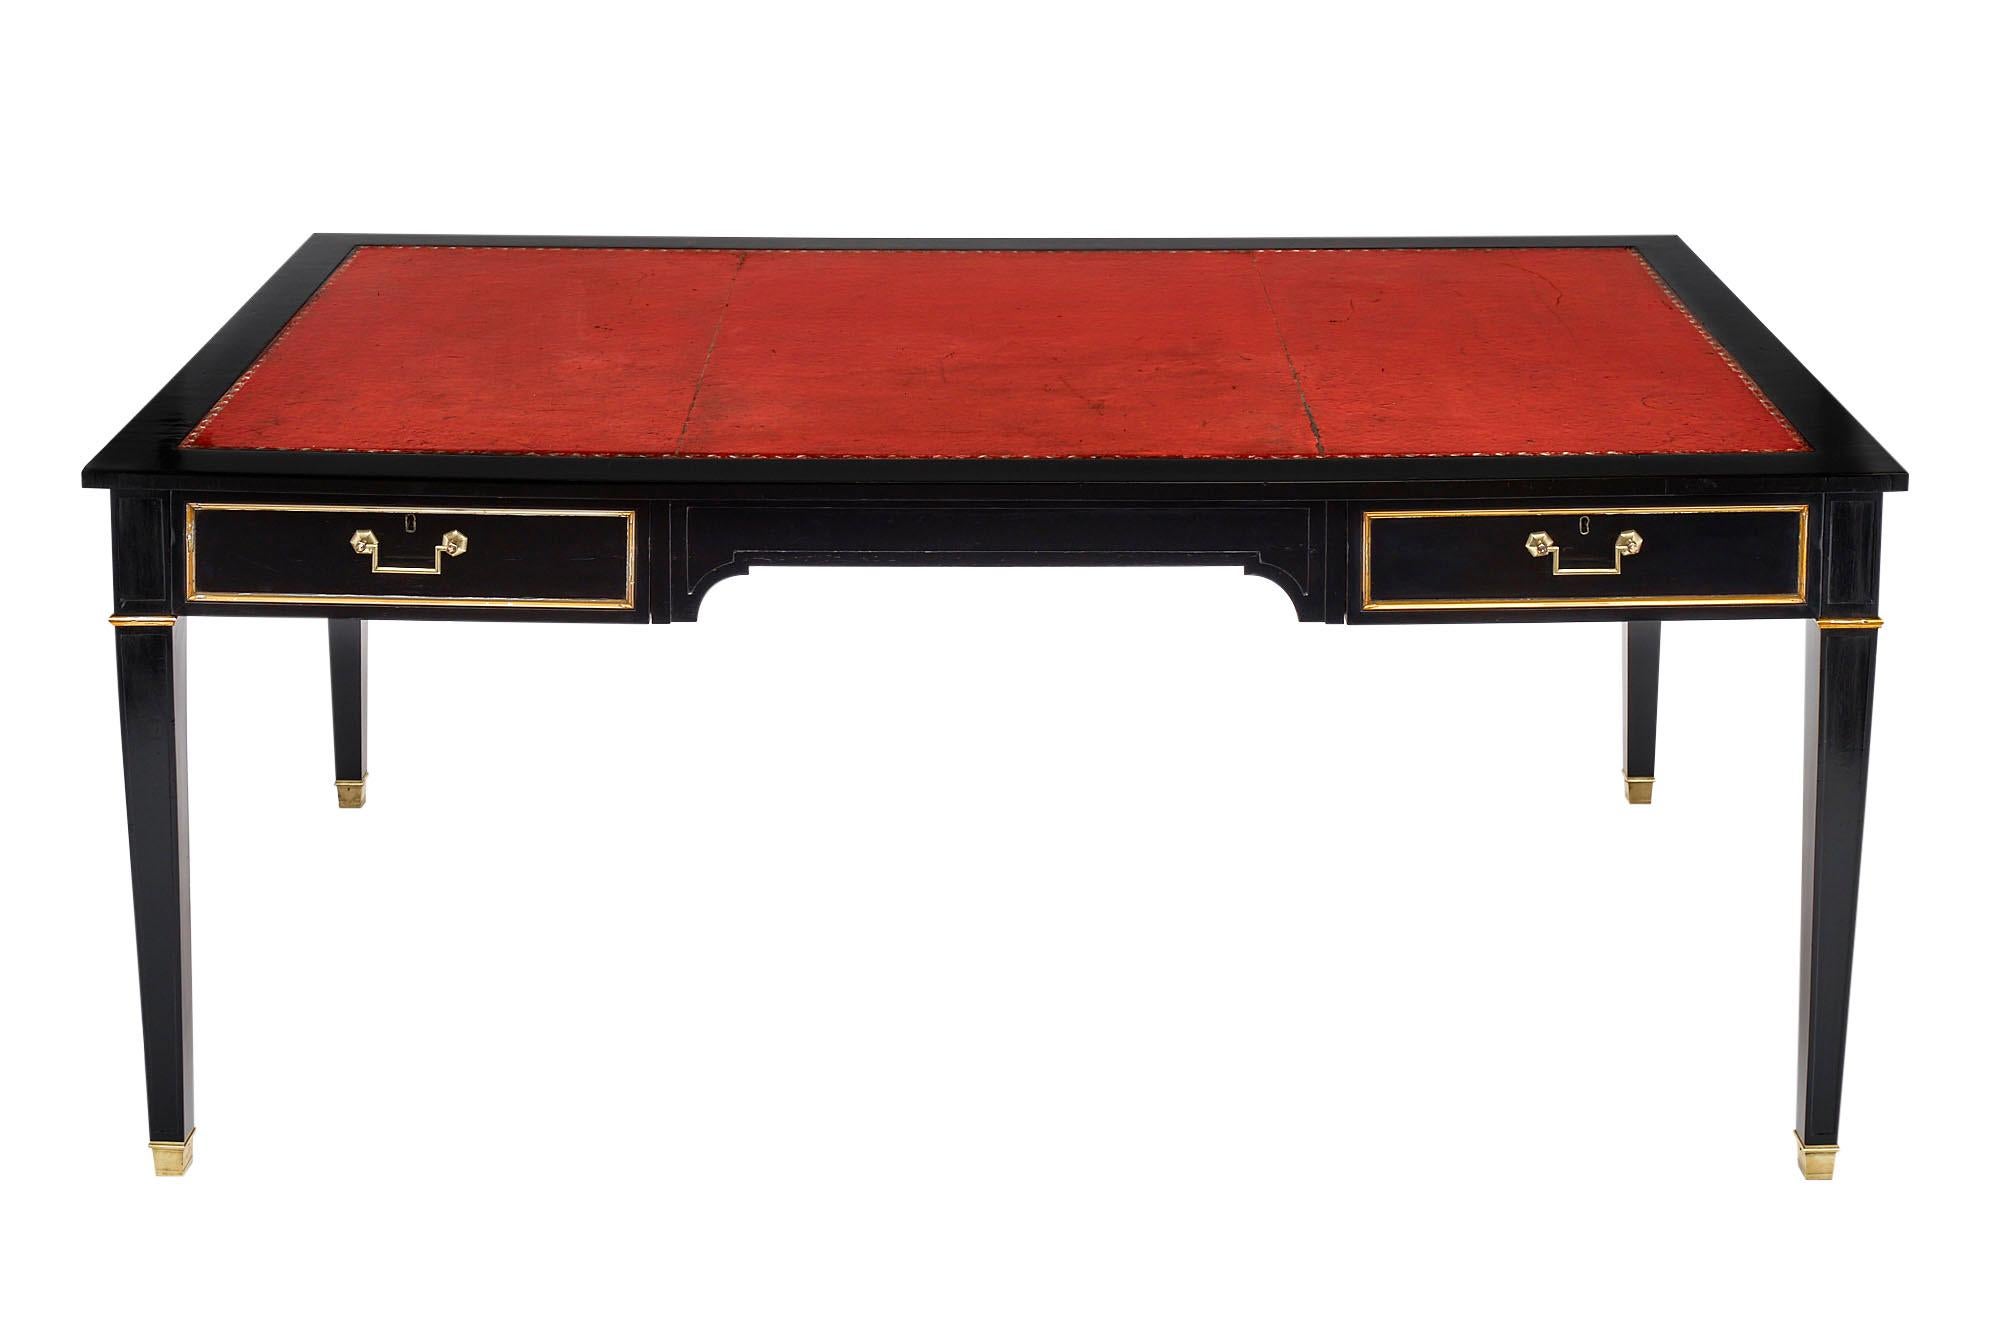 Louis XVI grand antique desk made of mahogany that has been ebonized and finished with a museum quality French polish. There are two dovetailed drawers and beautiful gilt trim throughout. We love the brass hardware and squared, tapered legs. The red